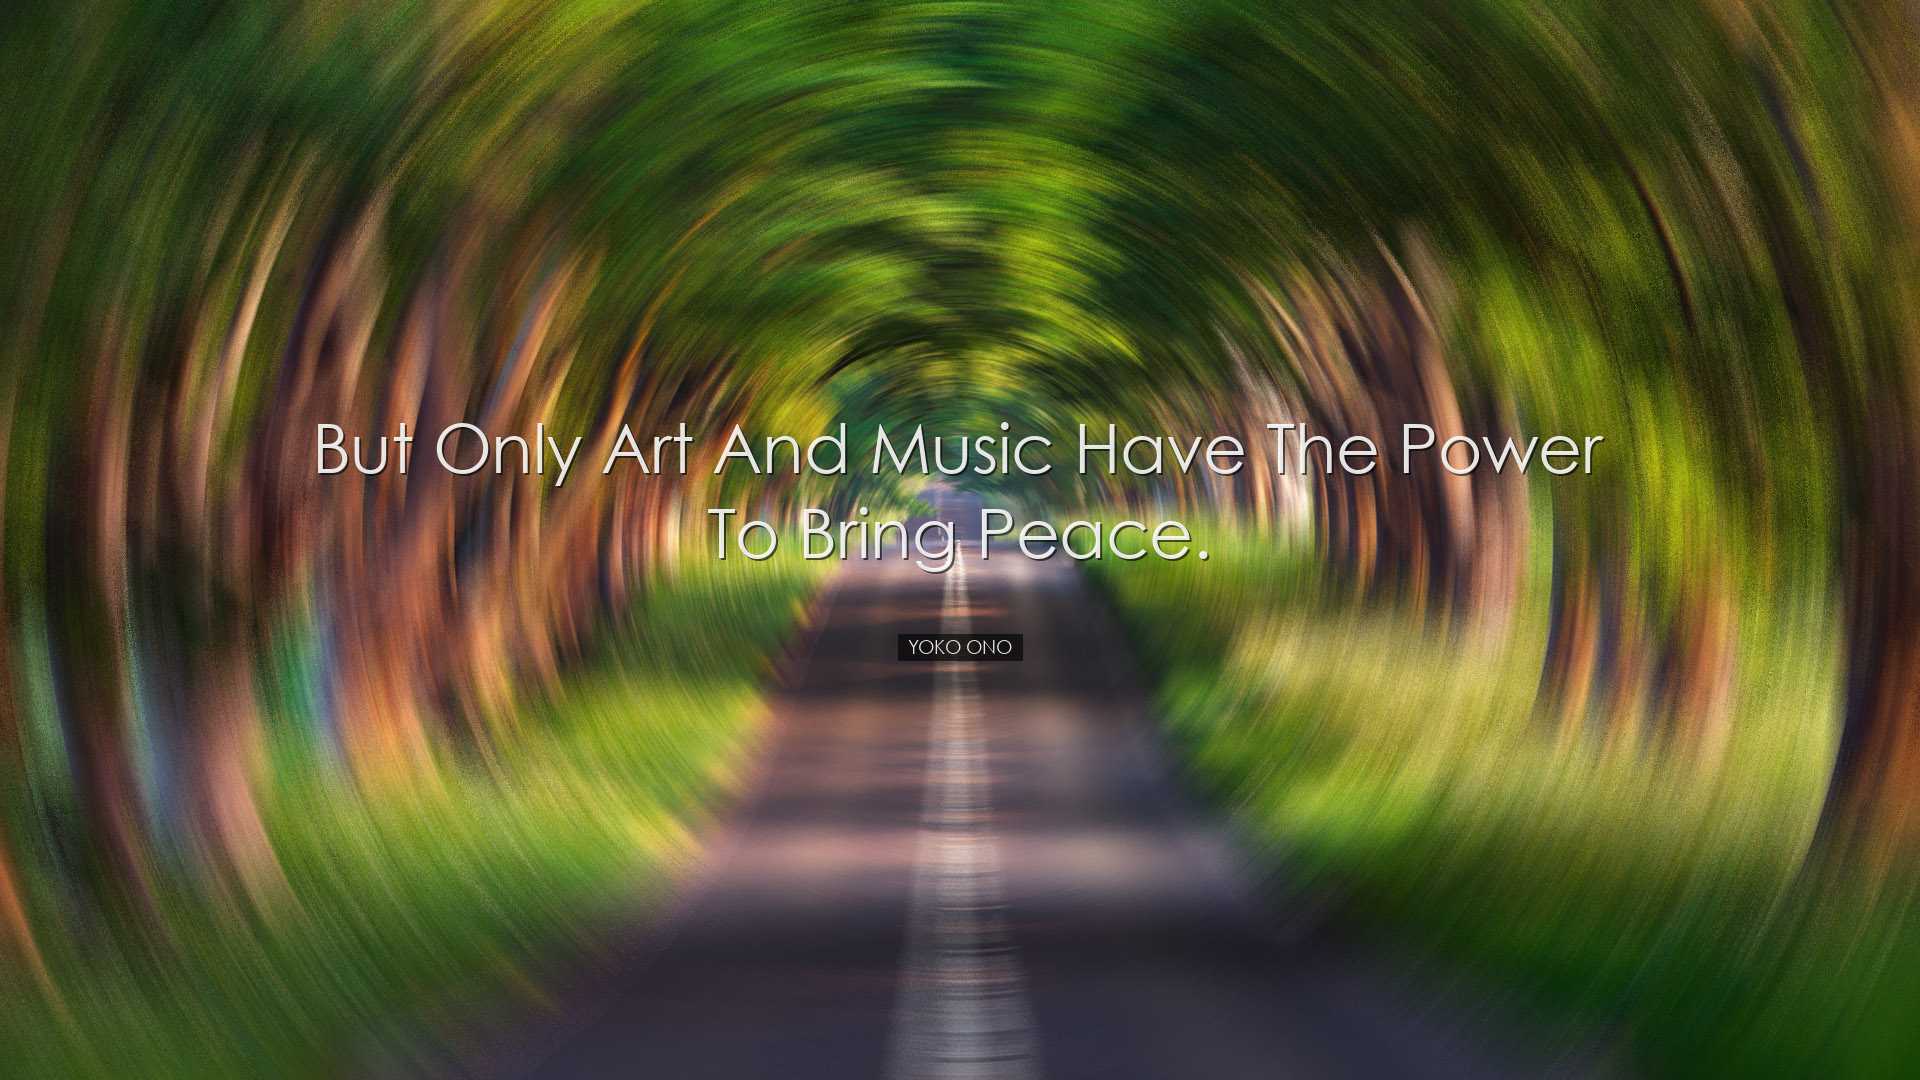 But only art and music have the power to bring peace. - Yoko Ono